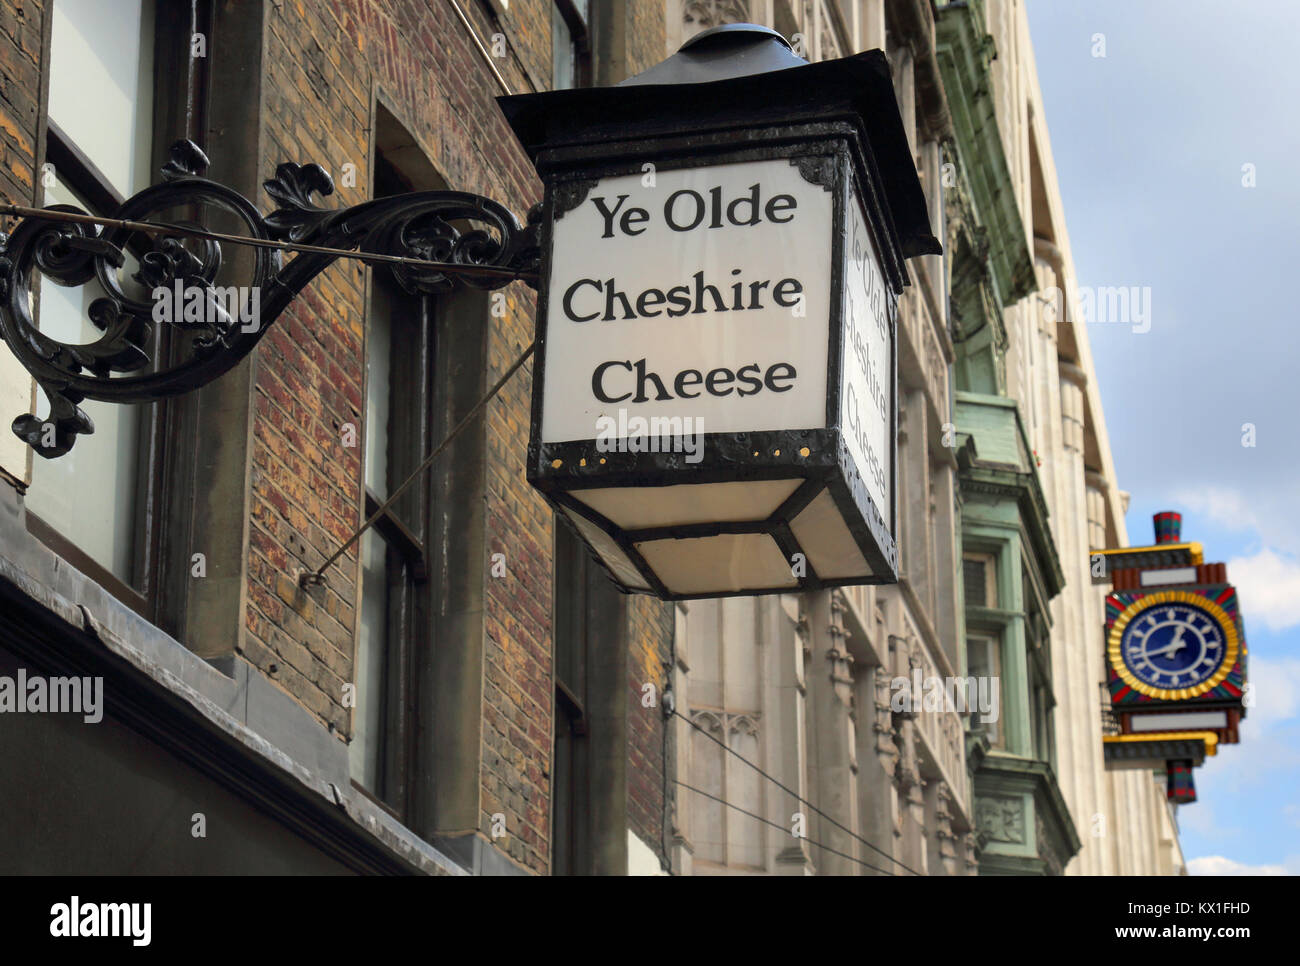 Ye old Cheshire Cheese pub dans Fleet Street Londres Banque D'Images